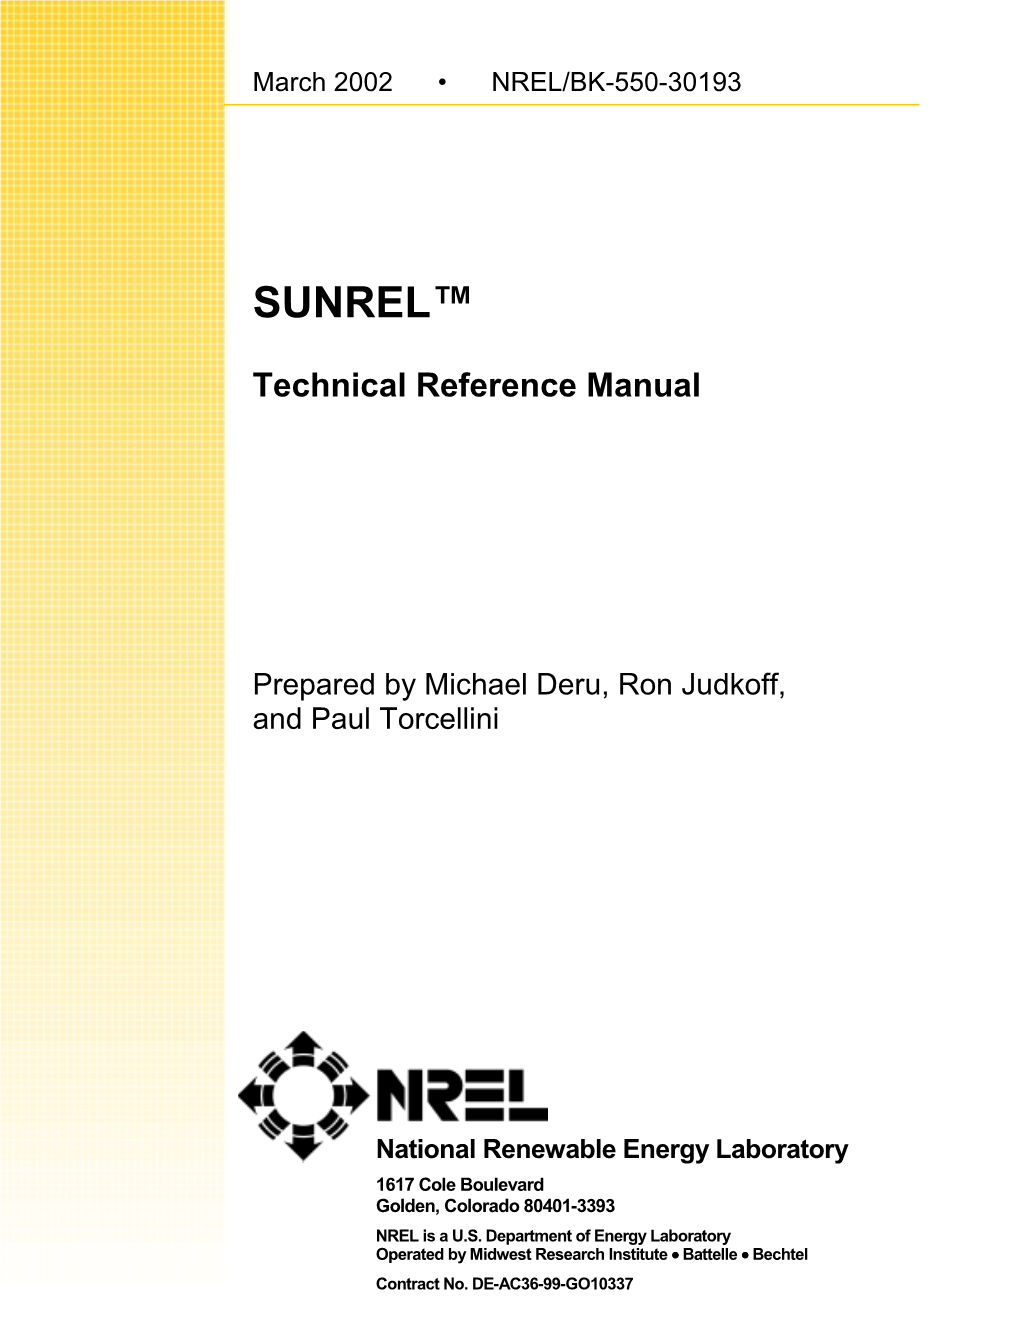 SUNREL (TM) Technical Reference Manual